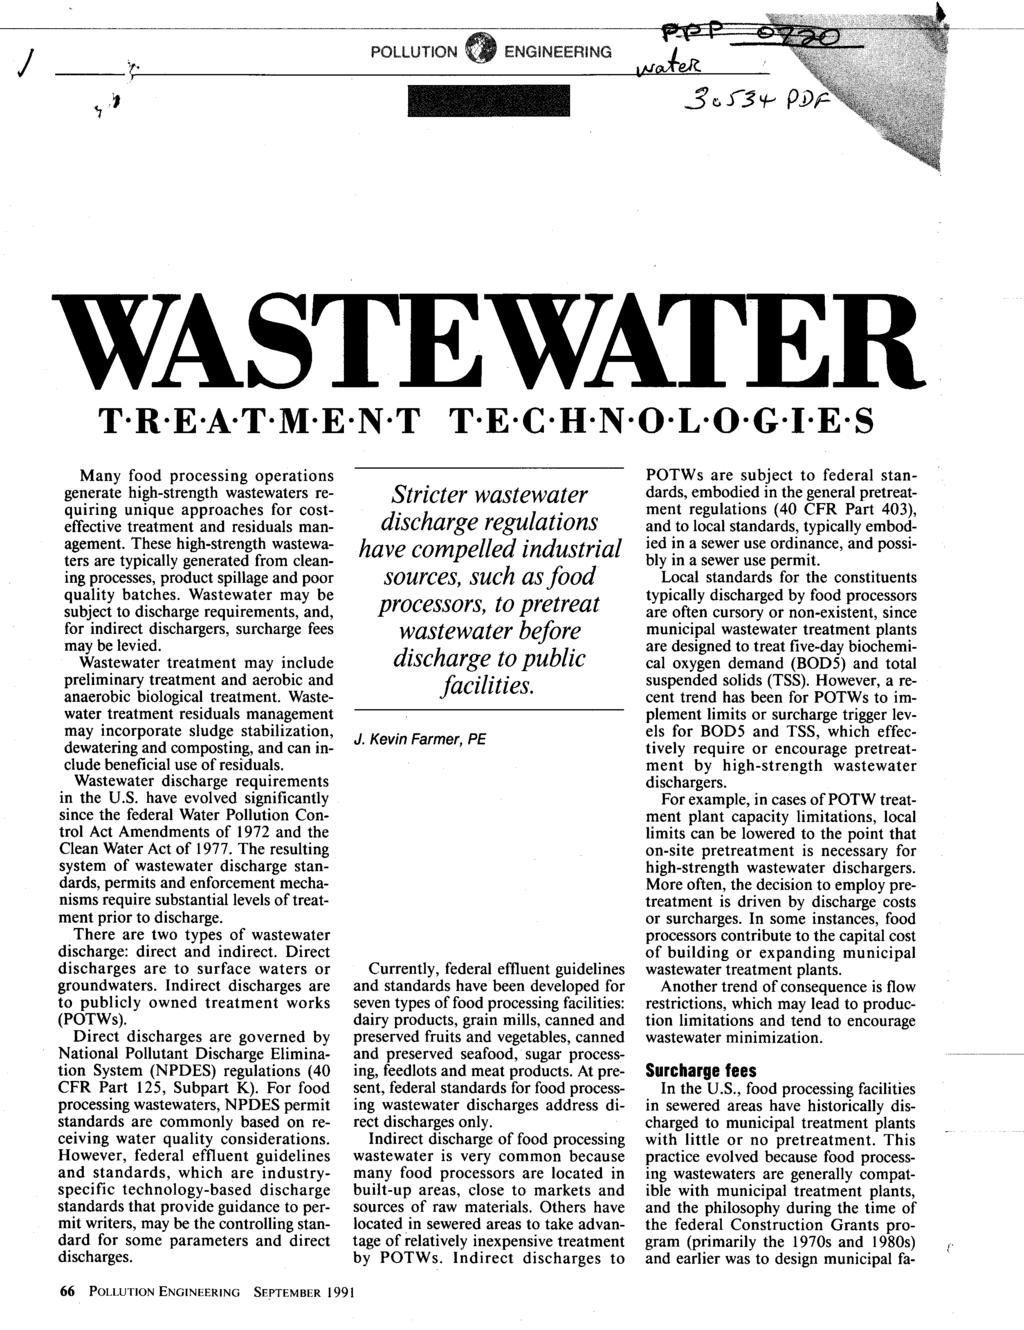 WASTE WATER T*R*E*A*T*M*E*N*T T*E*C*H*N*O*L*O*G*I.E Many food processing operations generate high-strength wastewaters requiring unique approaches for costeffective treatment and residuals management.